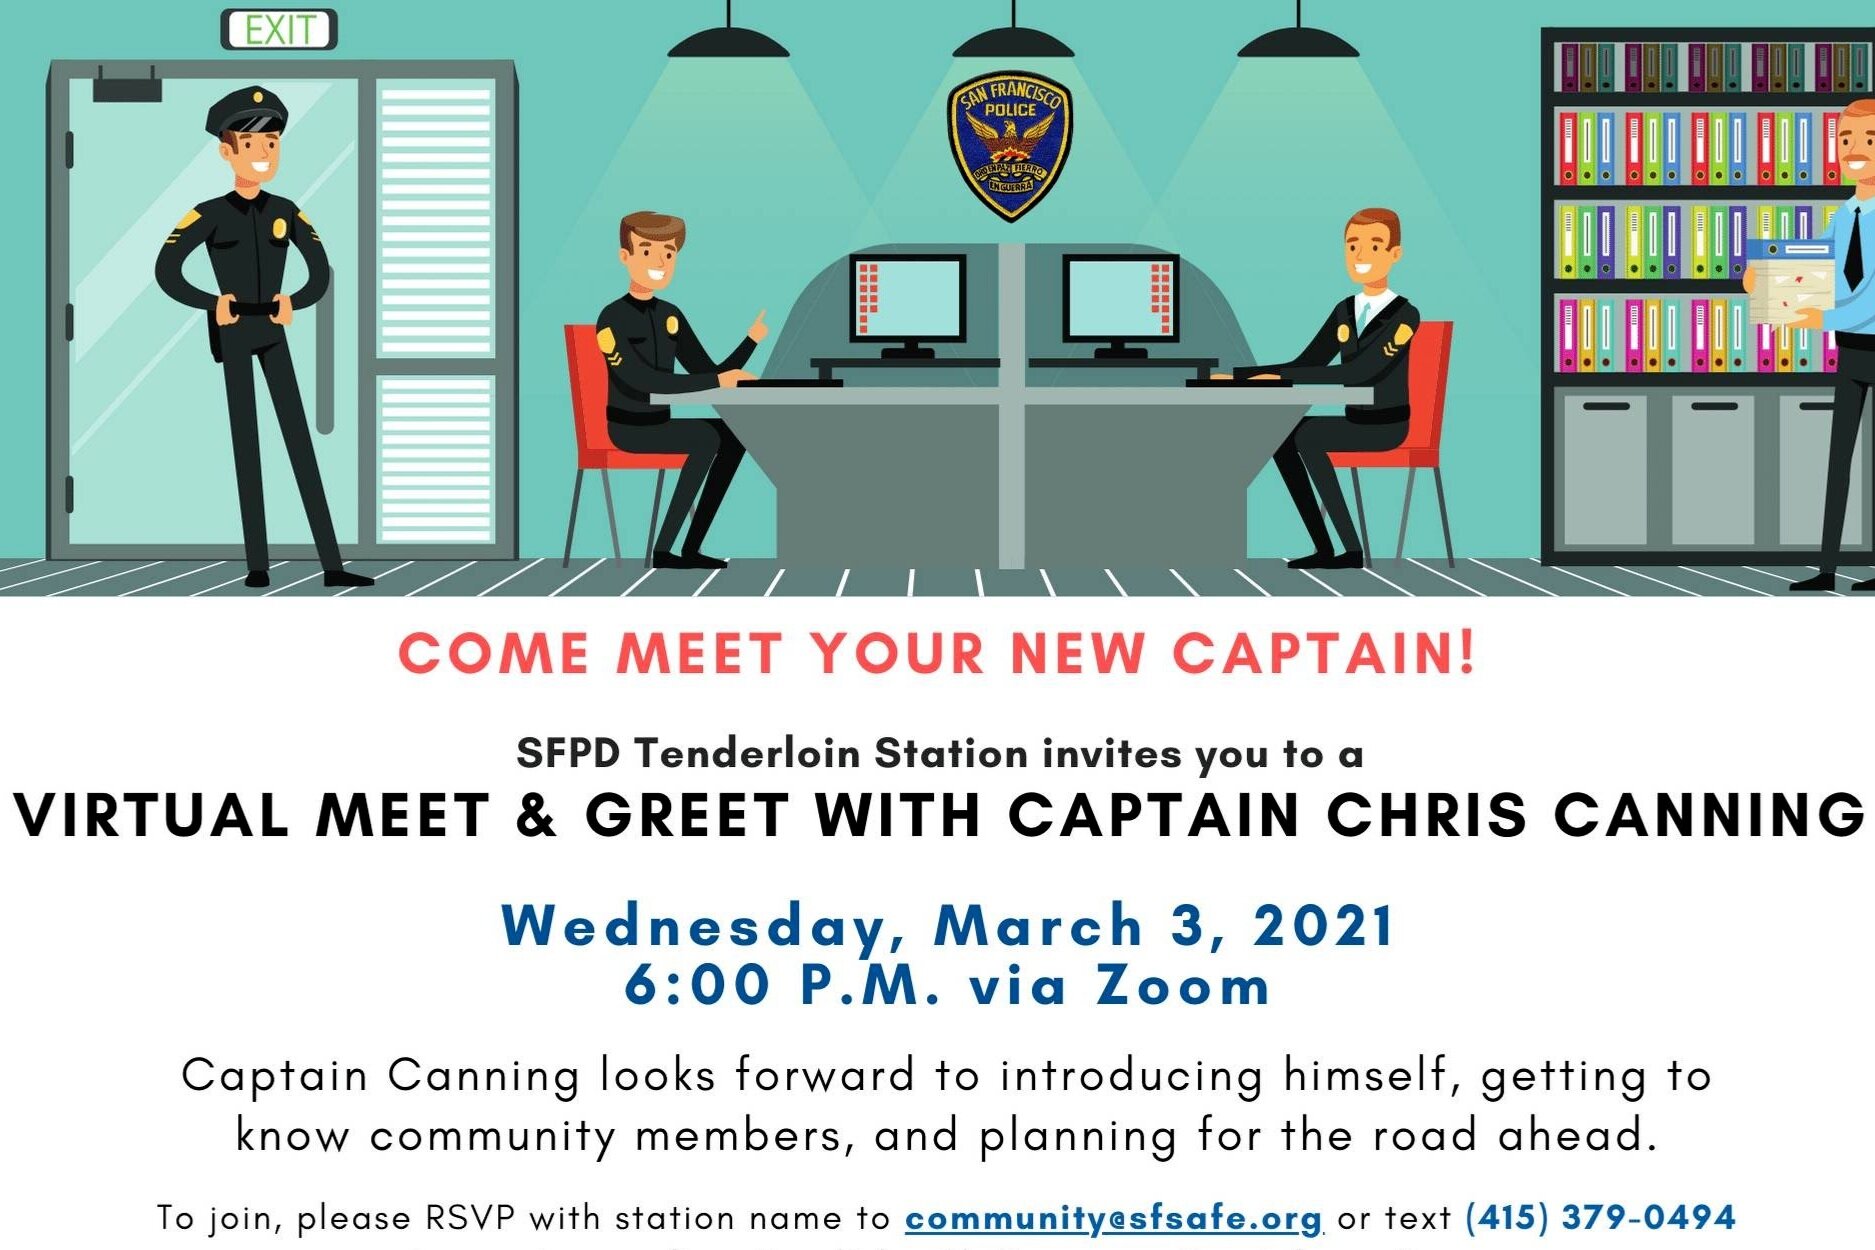 Virtual Meet and Greet For New Captain Chris Canning, March 3rd